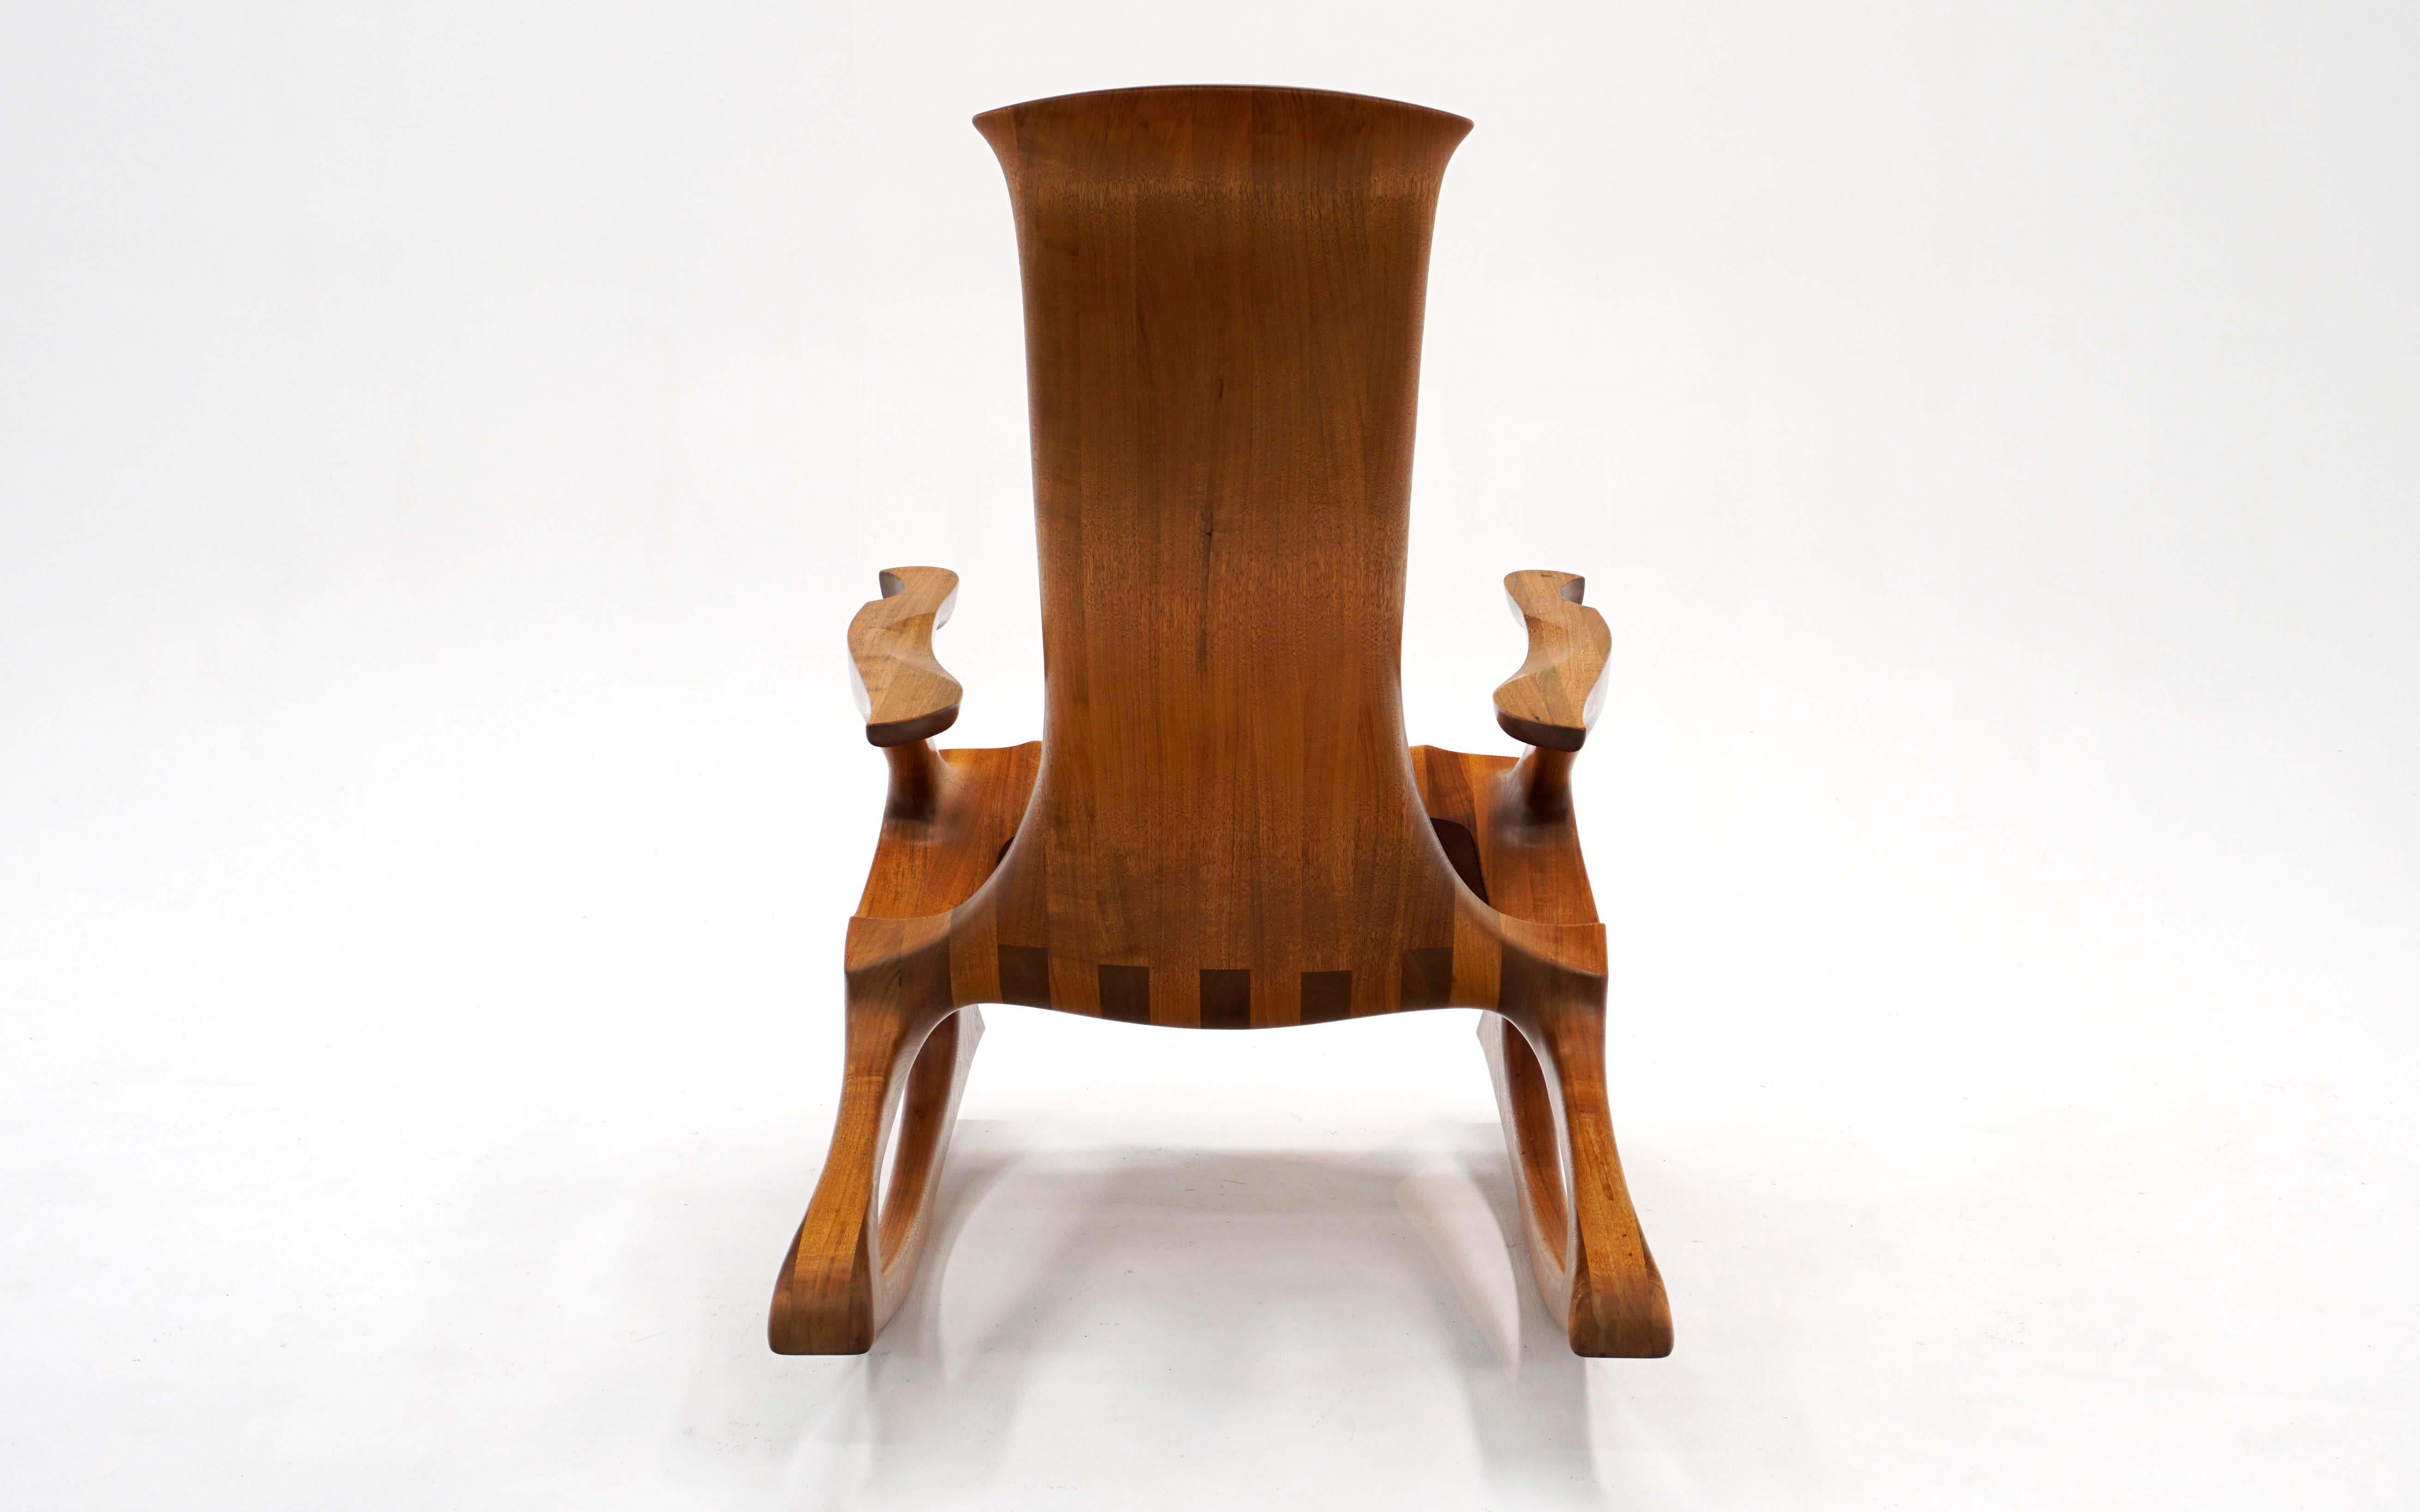 Mid-20th Century American Studio Craft Sculptural Walnut Rocking Chair, Hand Crafted, Marked